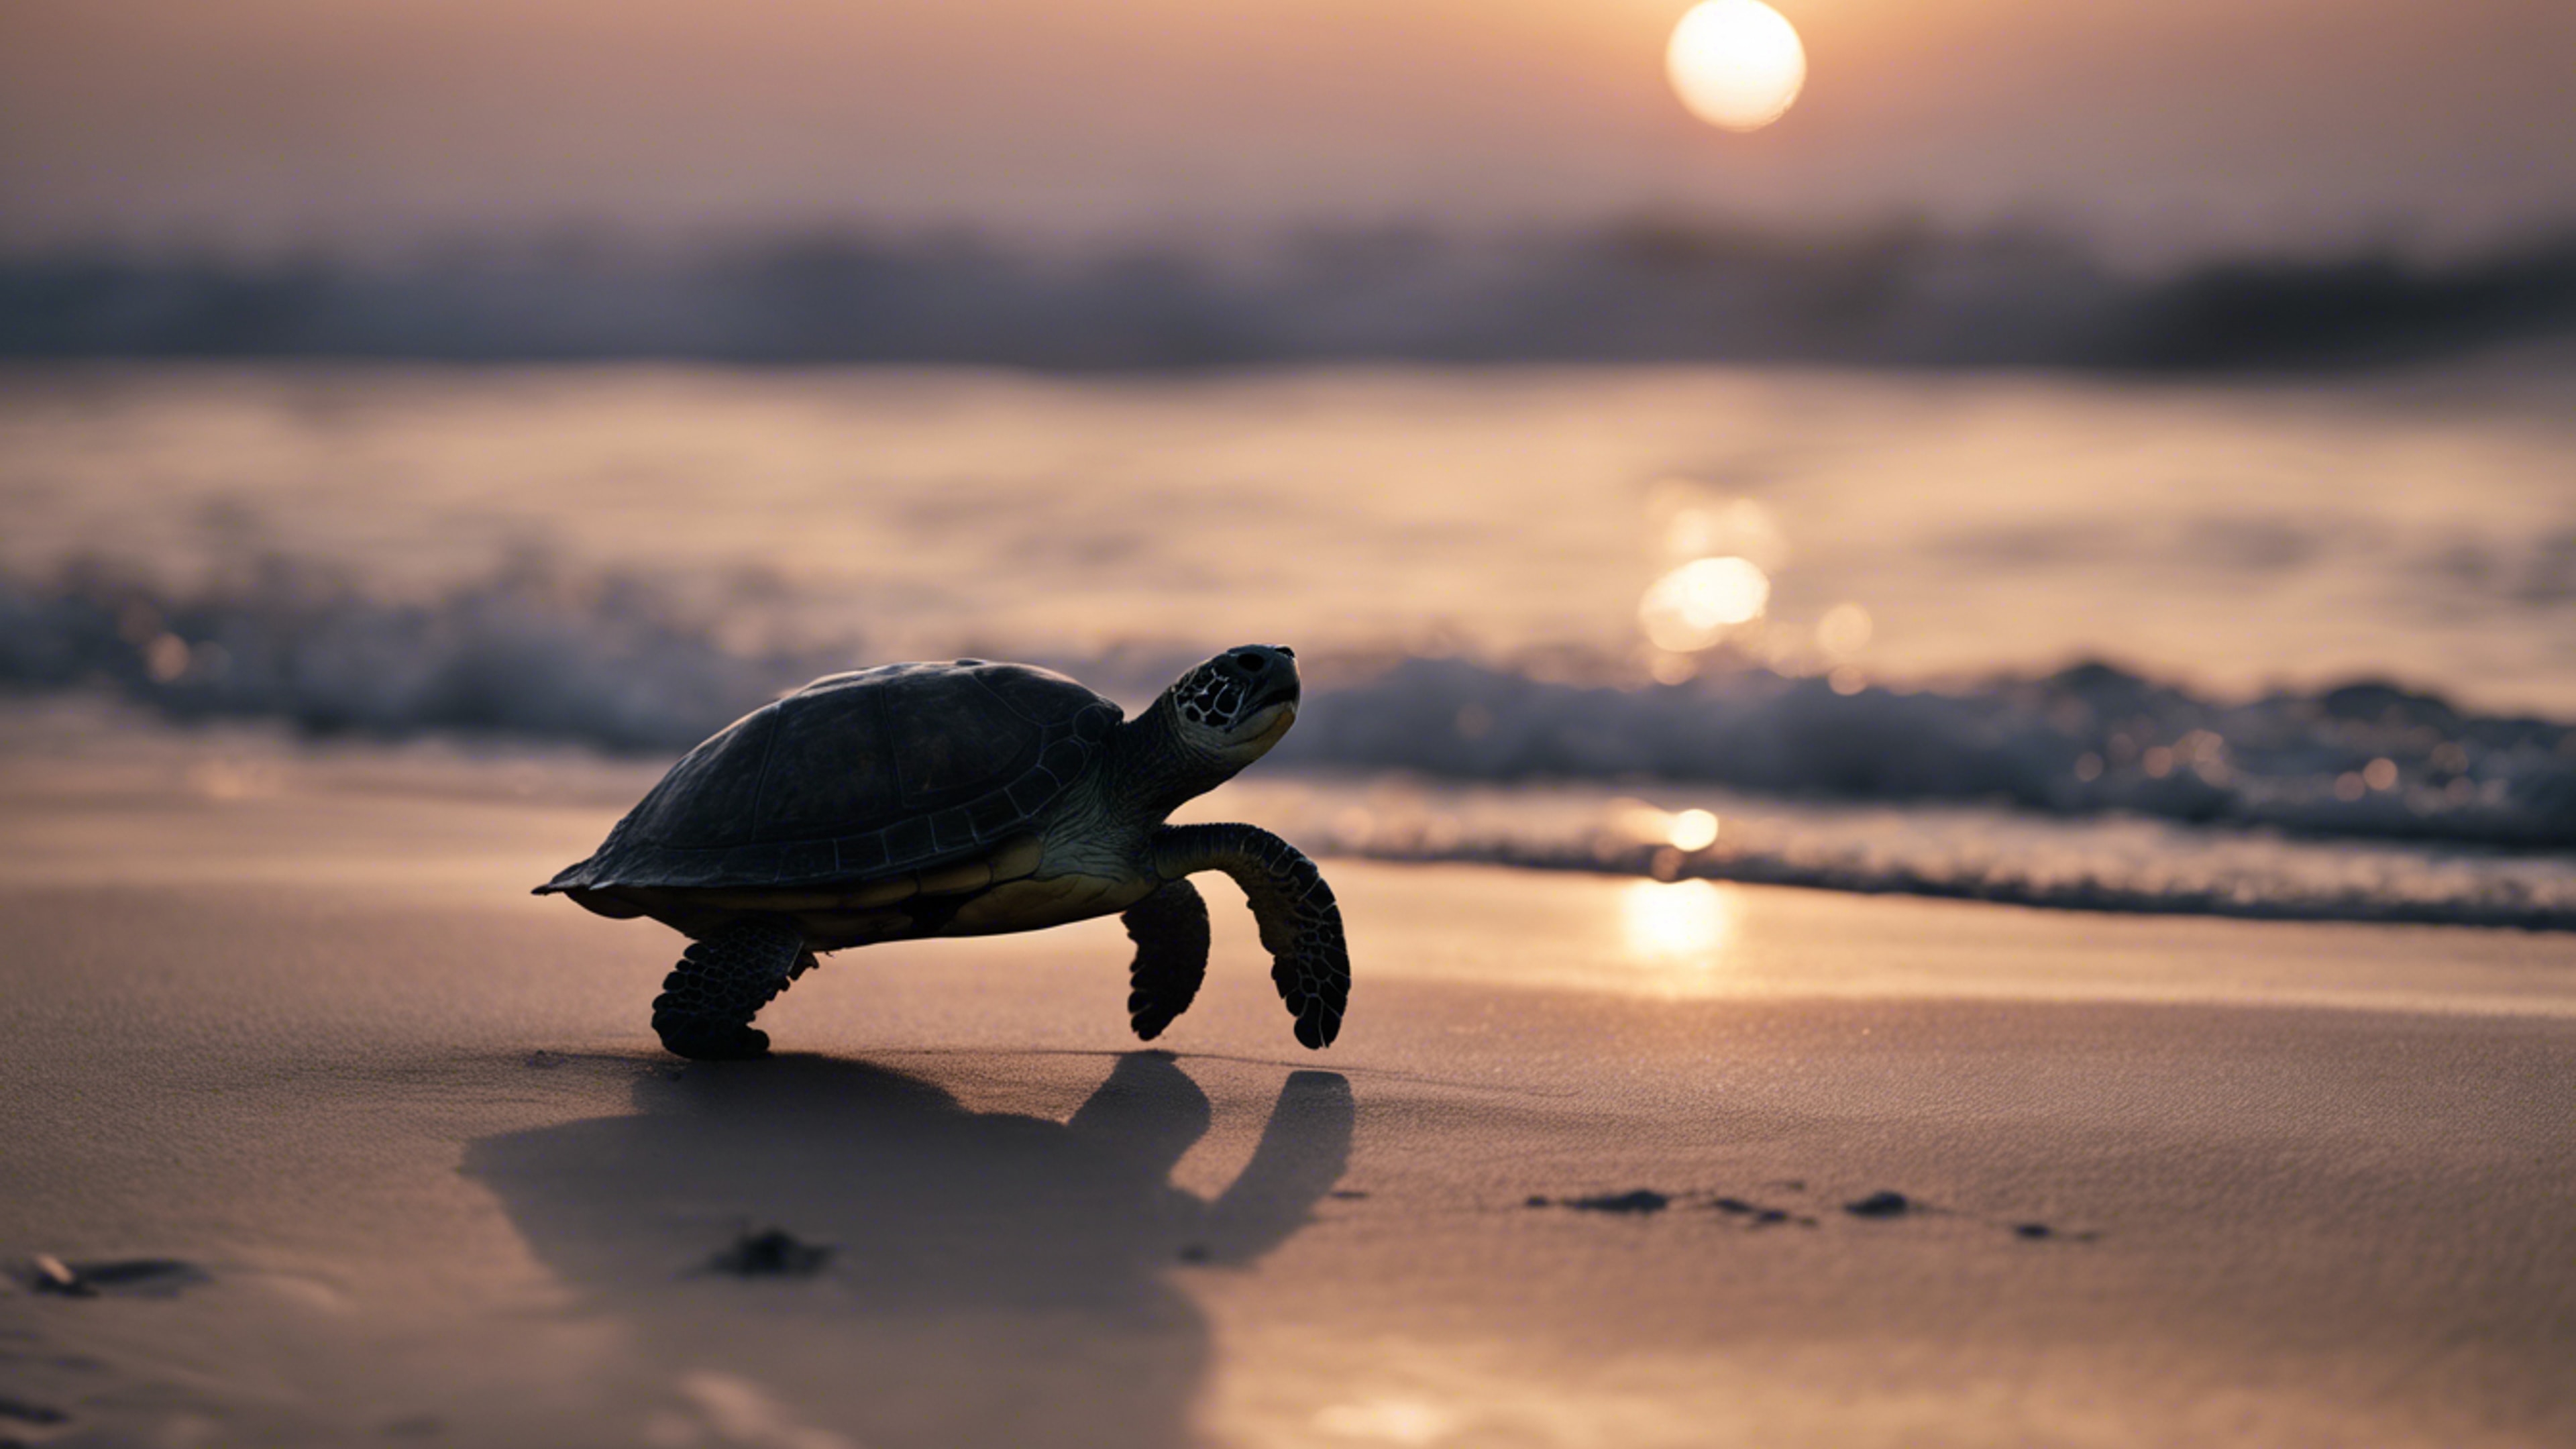 Dusk setting in on a beach with a silhouette of a sea turtle in the background. Wallpaper[b0cd3061f3b24faa9876]